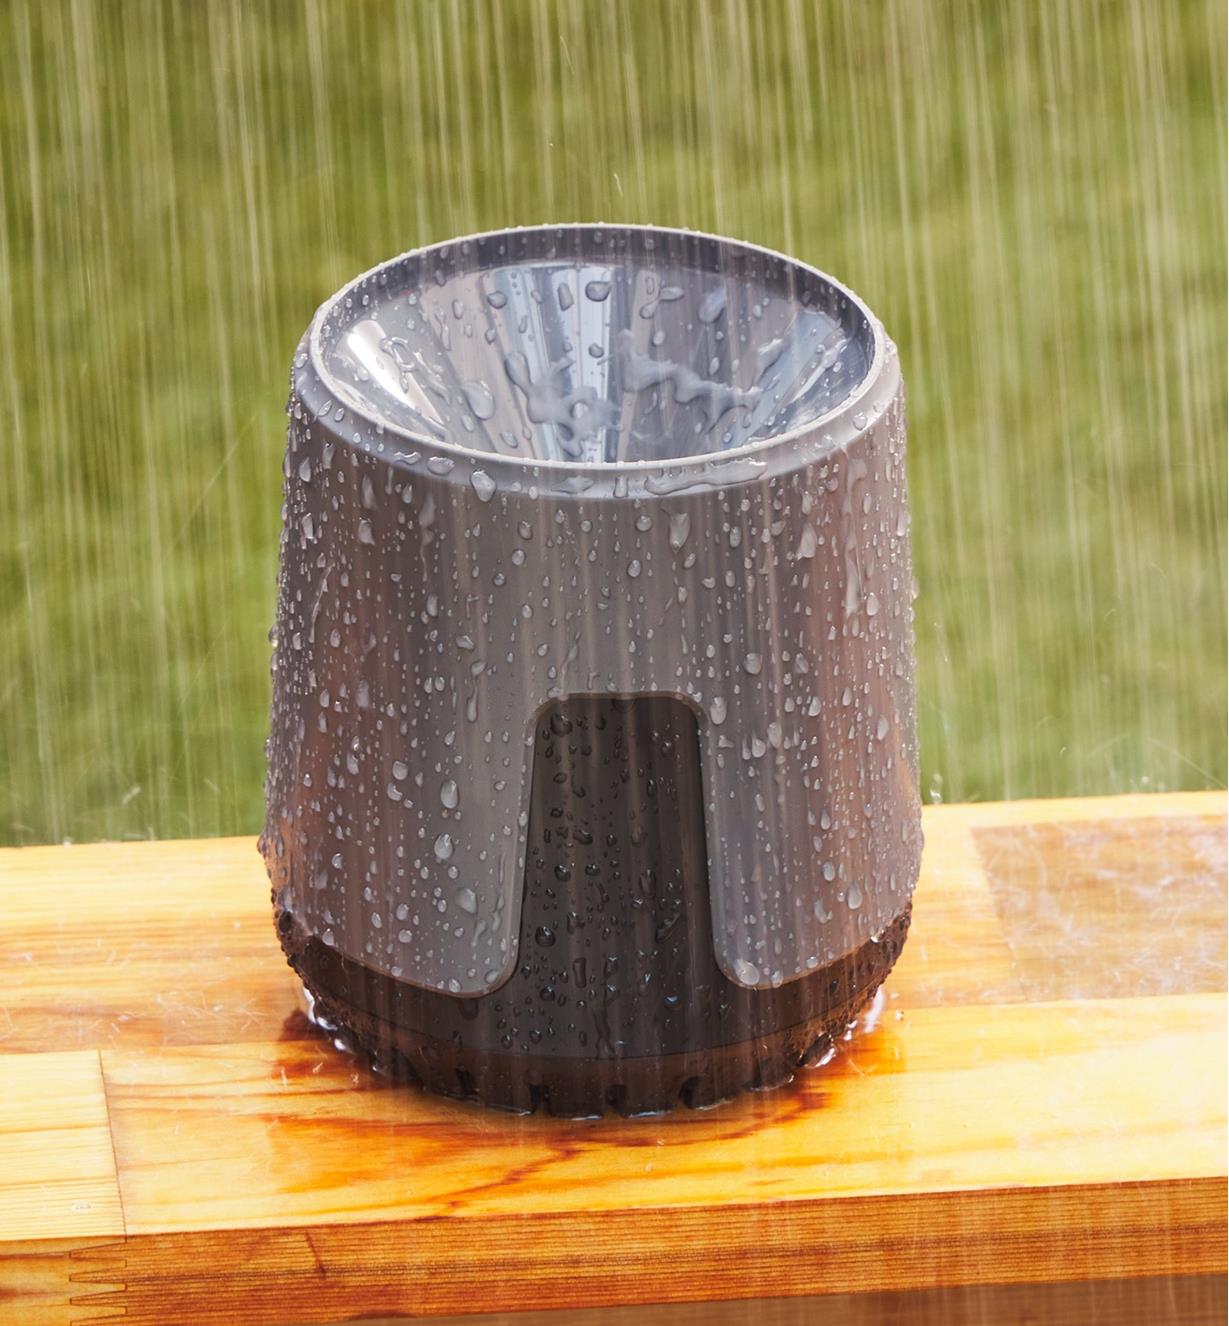 The rain gauge sits on an outdoor wooden surface as it is raining